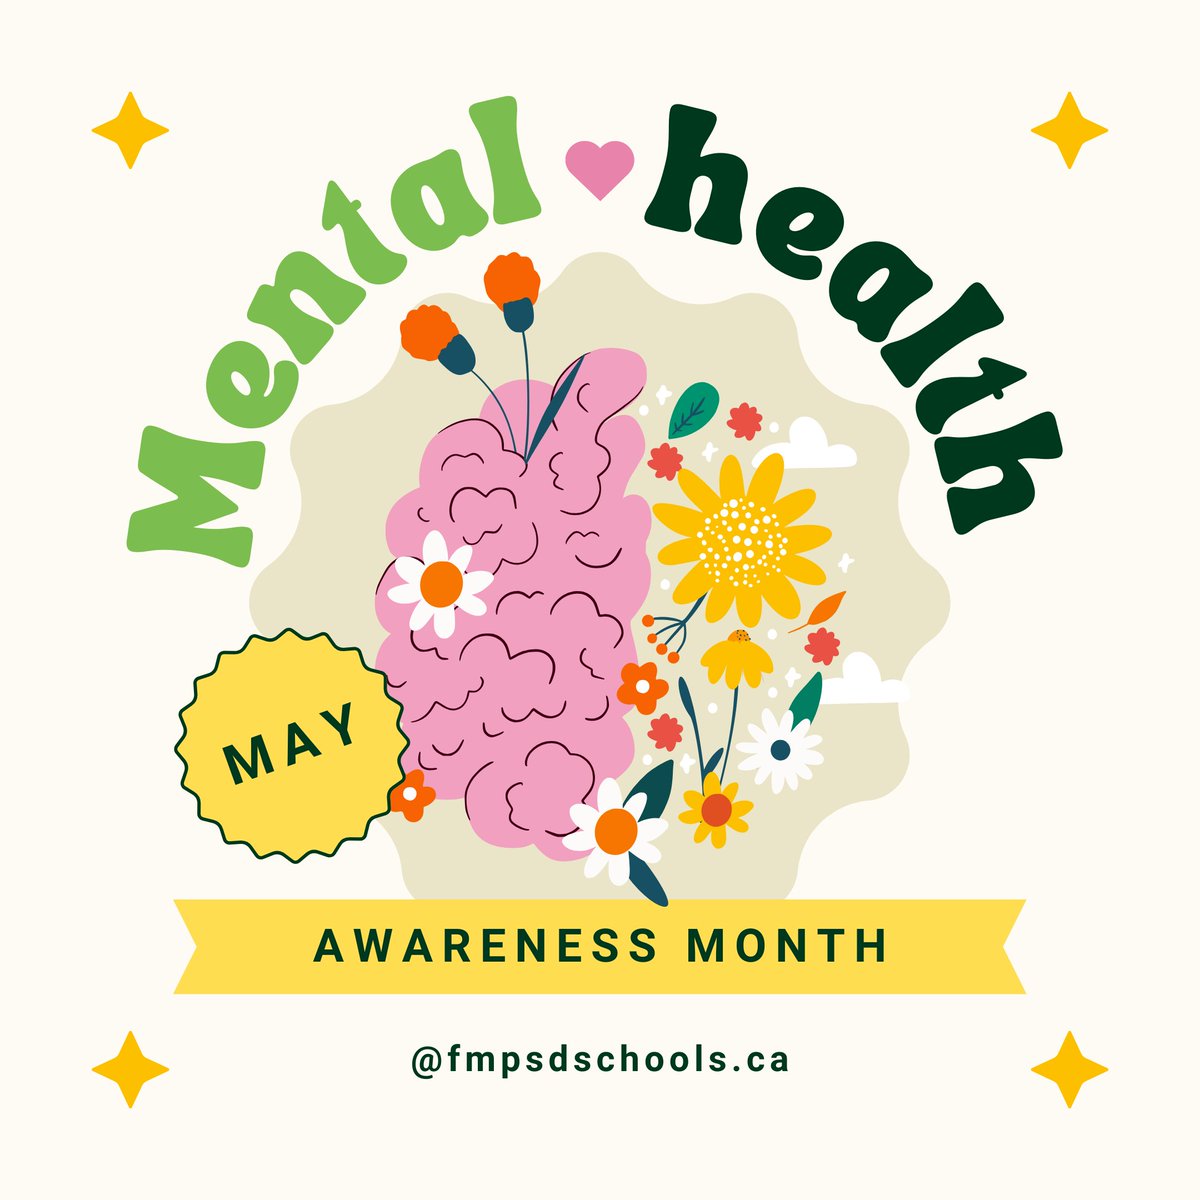 May is Mental Health Awareness Month, and at #FMPSD, we're committed to supporting our community's well-being. Learn more about how FMPSD is here to support you: bit.ly/3UH9XF6 @annaleeskinner #FMPSD #YMM #RMWB